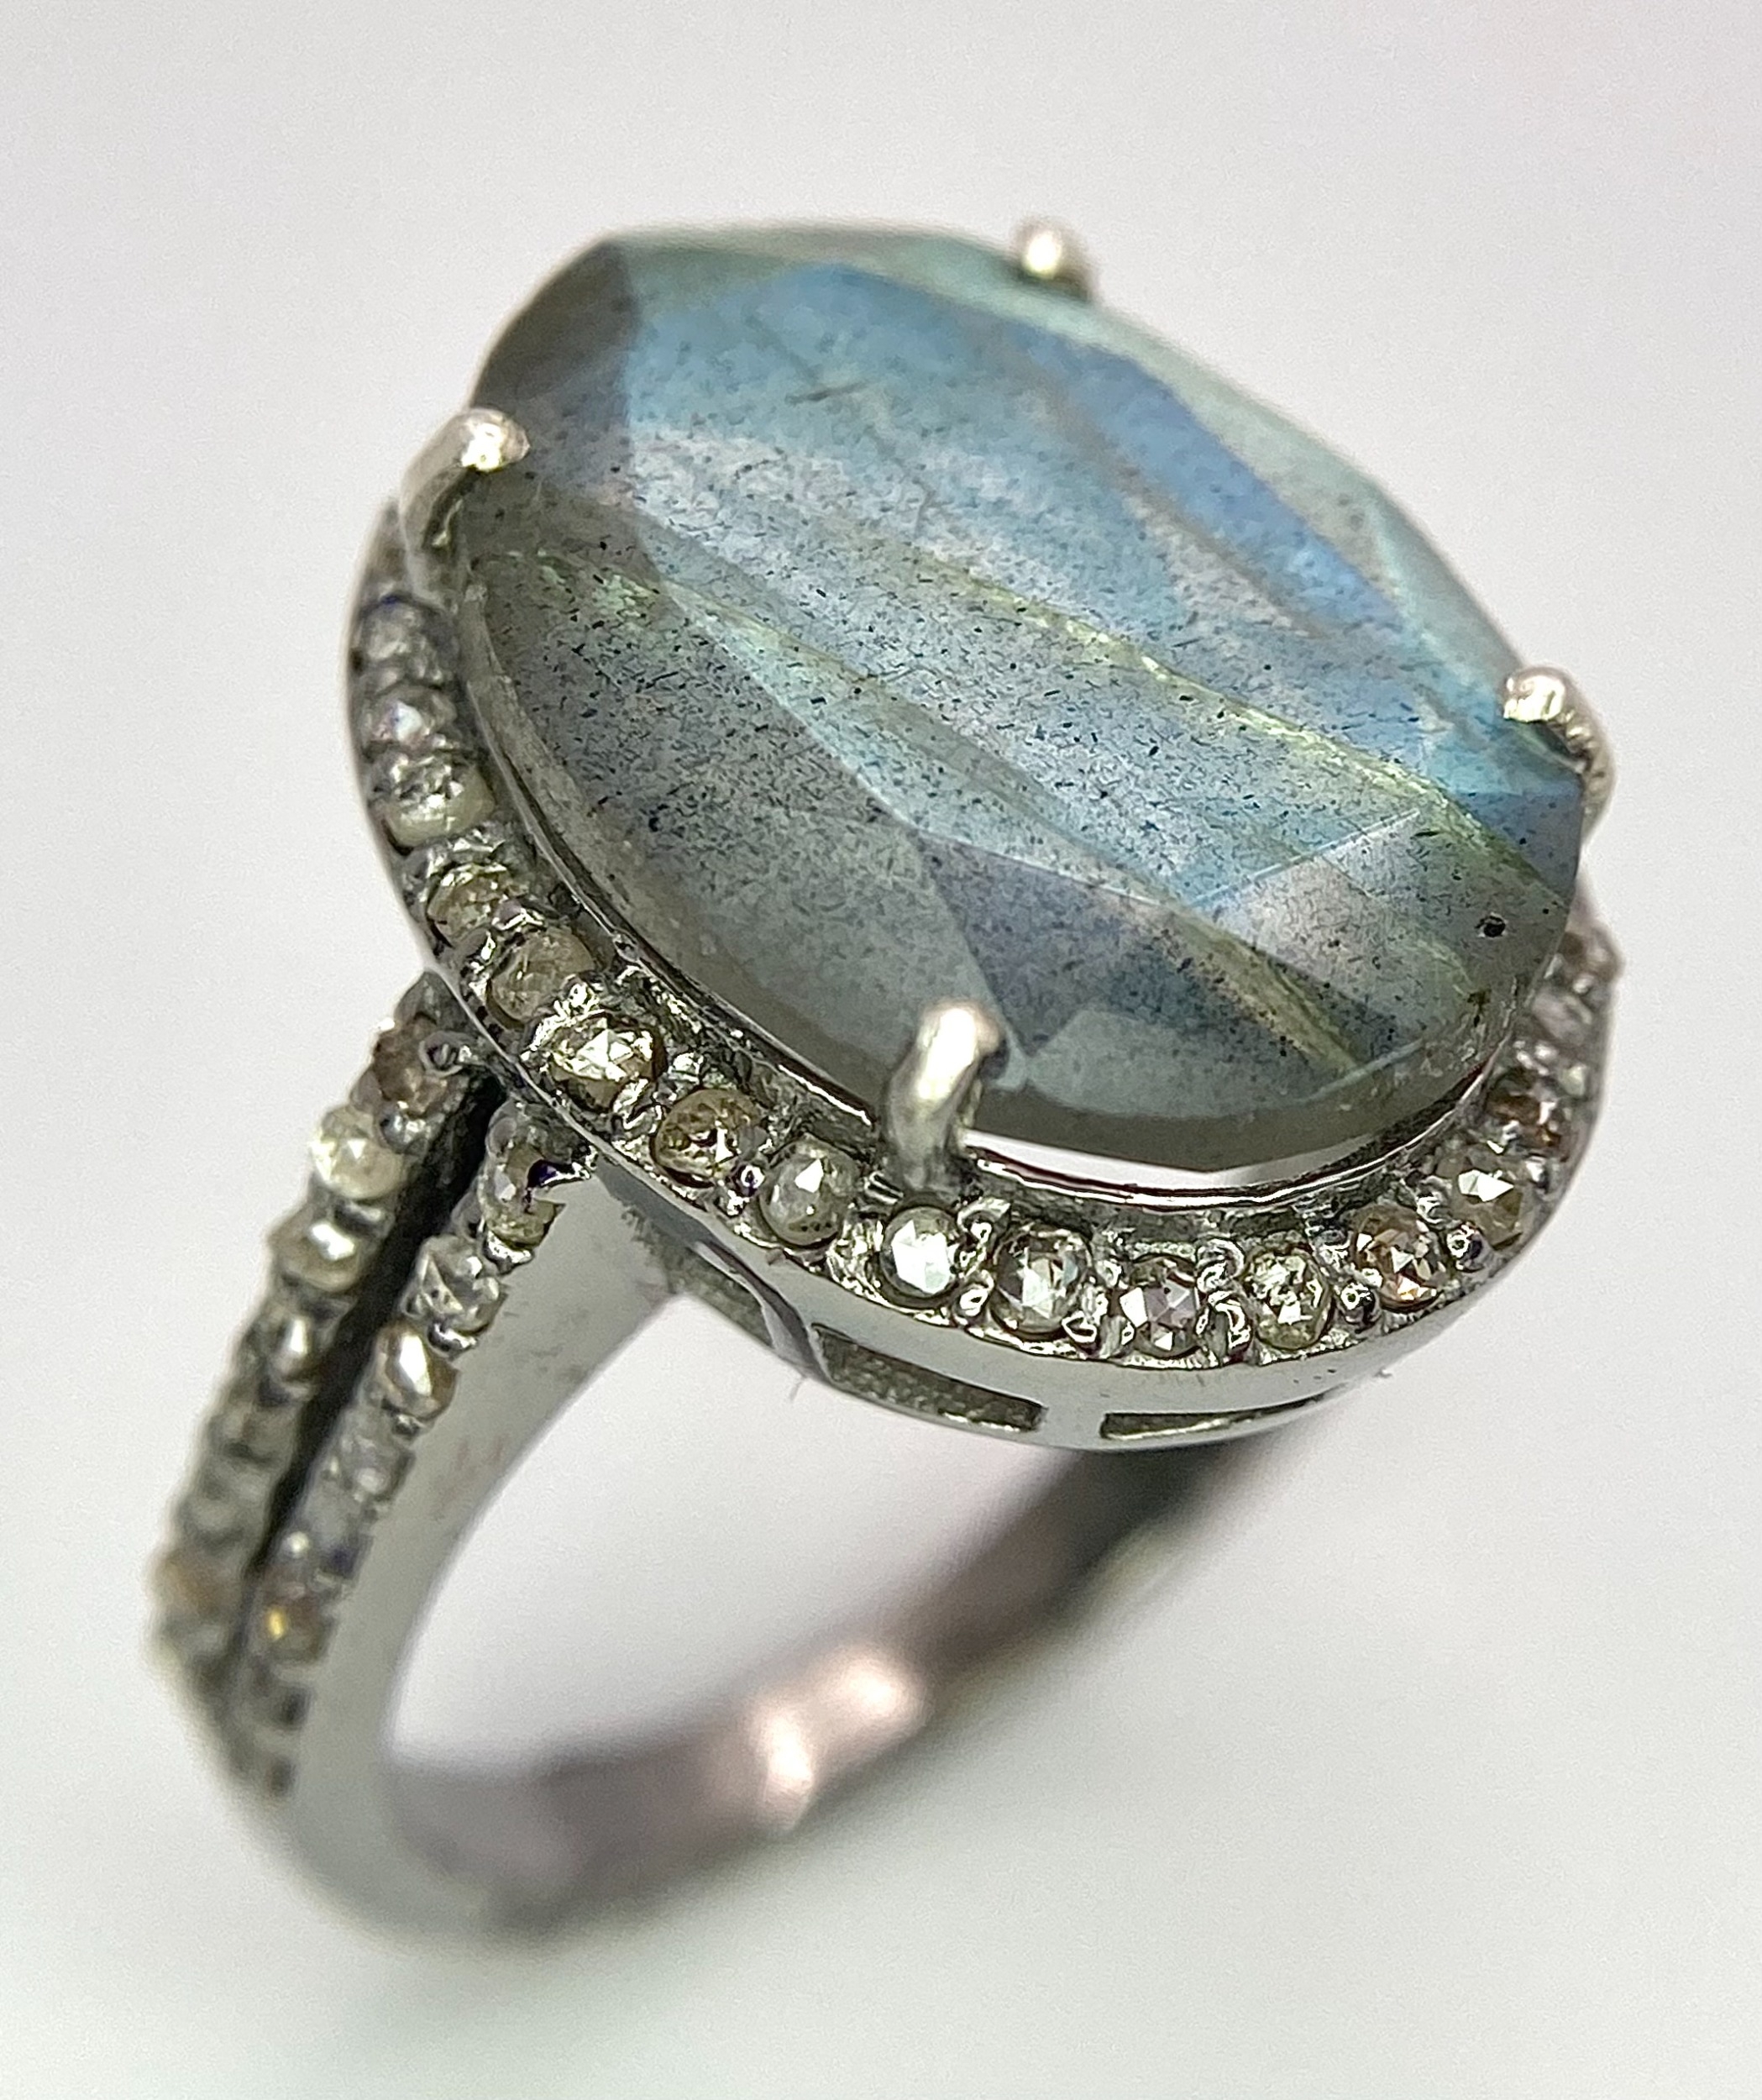 A 6.5ct Labradorite and Rose cut Diamond Ring. Diamonds- 0.60ctw. Size N. Comes with a - Image 2 of 7